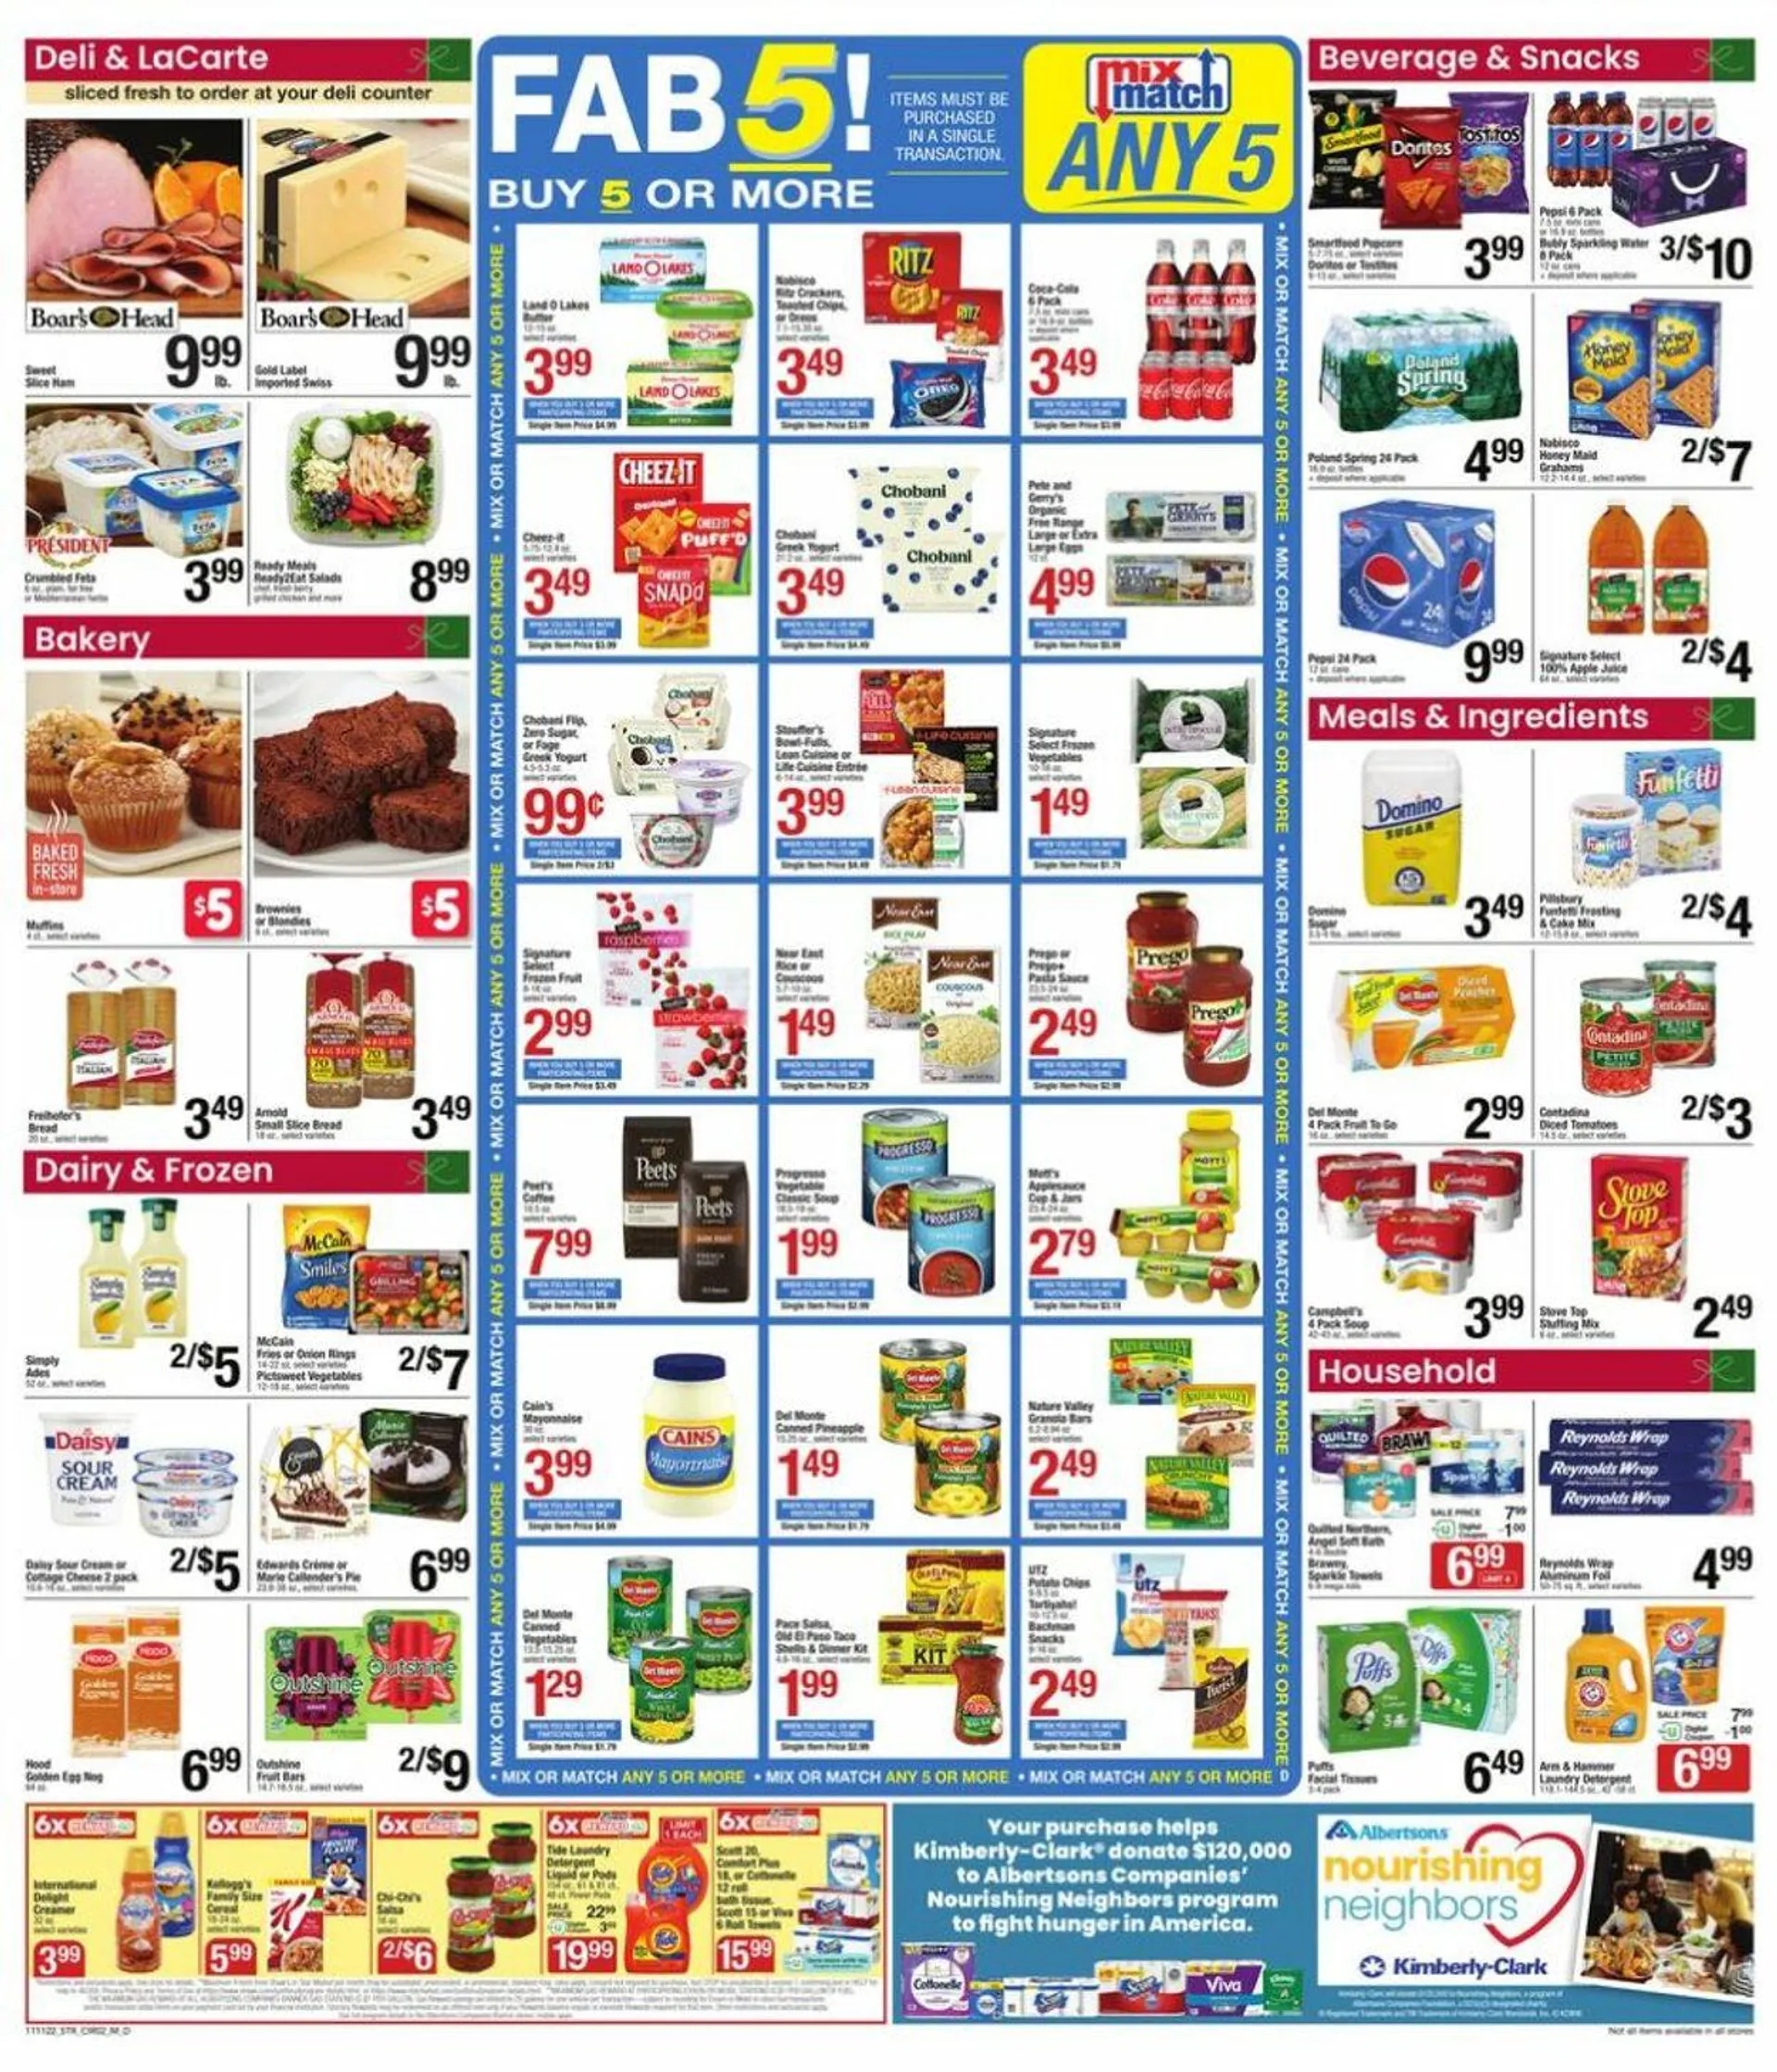 Star Market Current weekly ad - 3